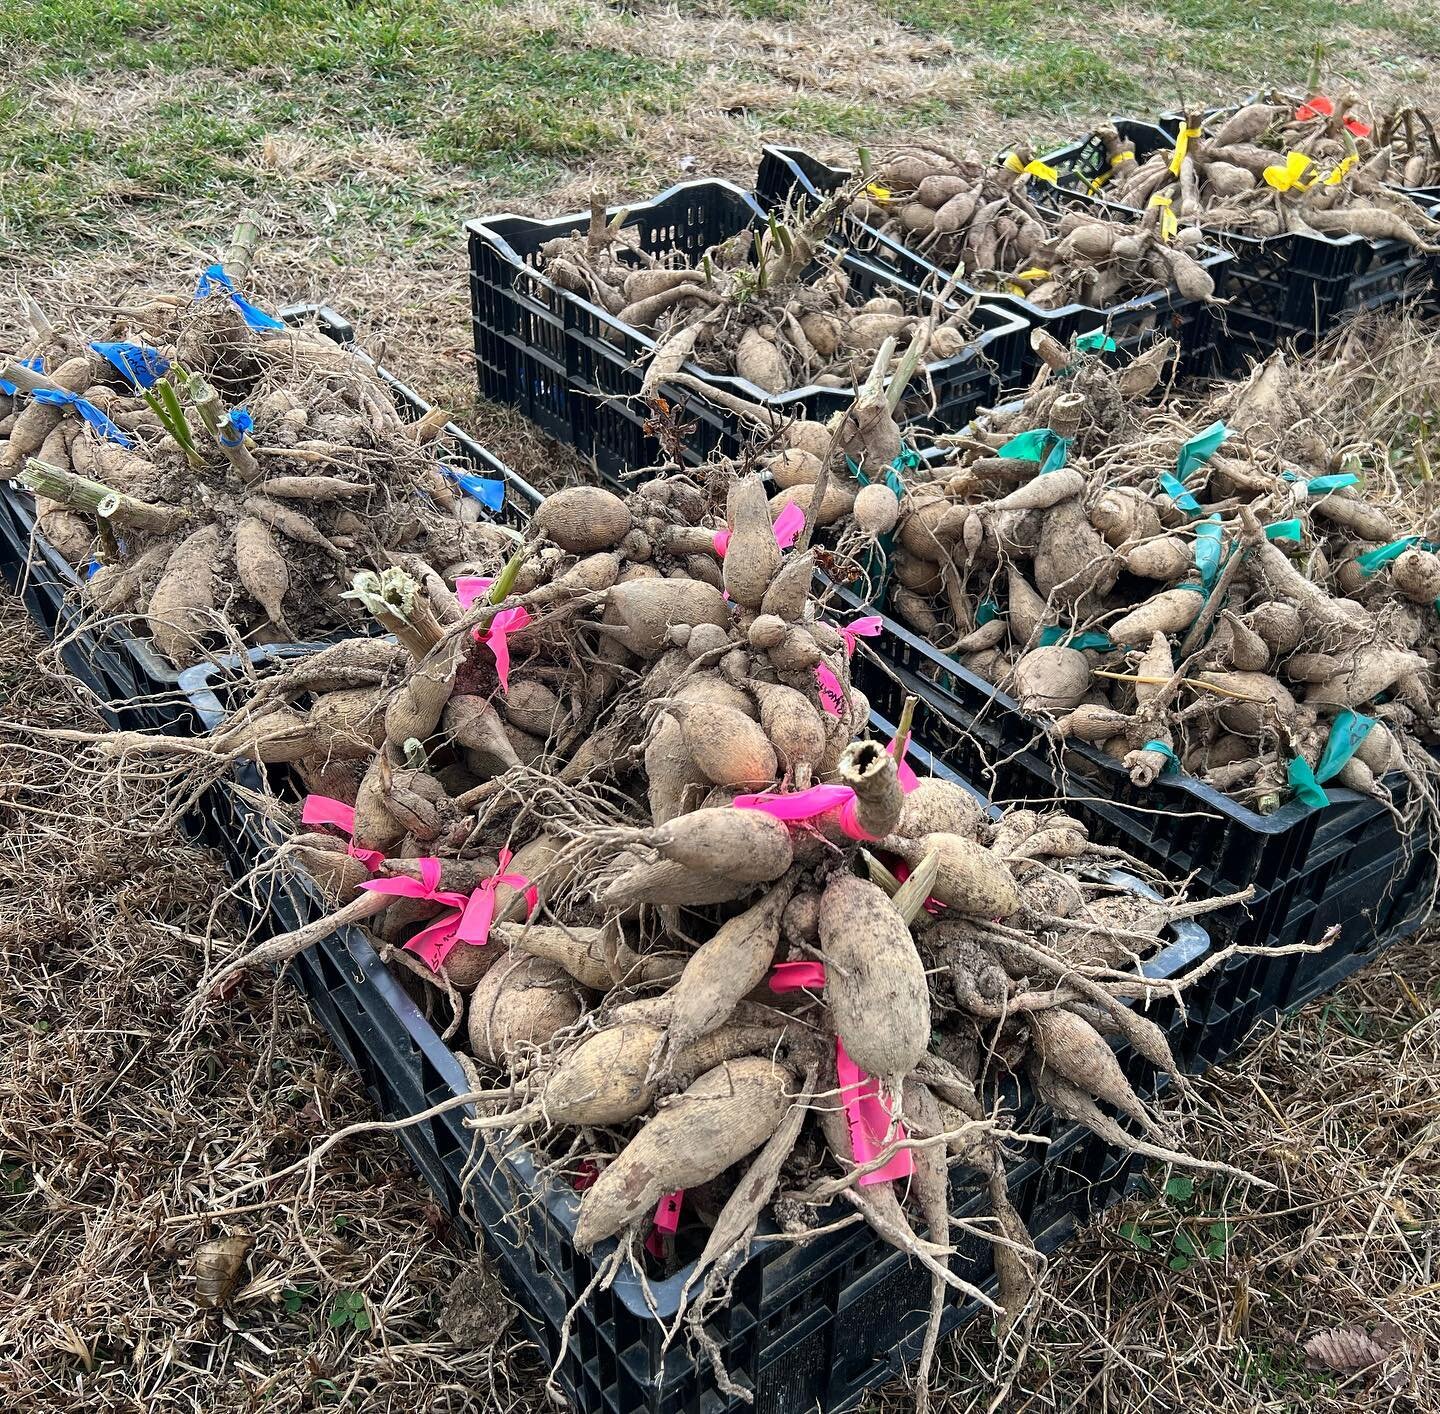 Great weather for our dahlia dig! These are dahlia tuber clumps, funny how ugly potato-like 🥔 starts produce the most gorgeous flower (in our opinion). Over 500 varieties lifted and tagged and now getting ready for winter storage. We usually hold ou